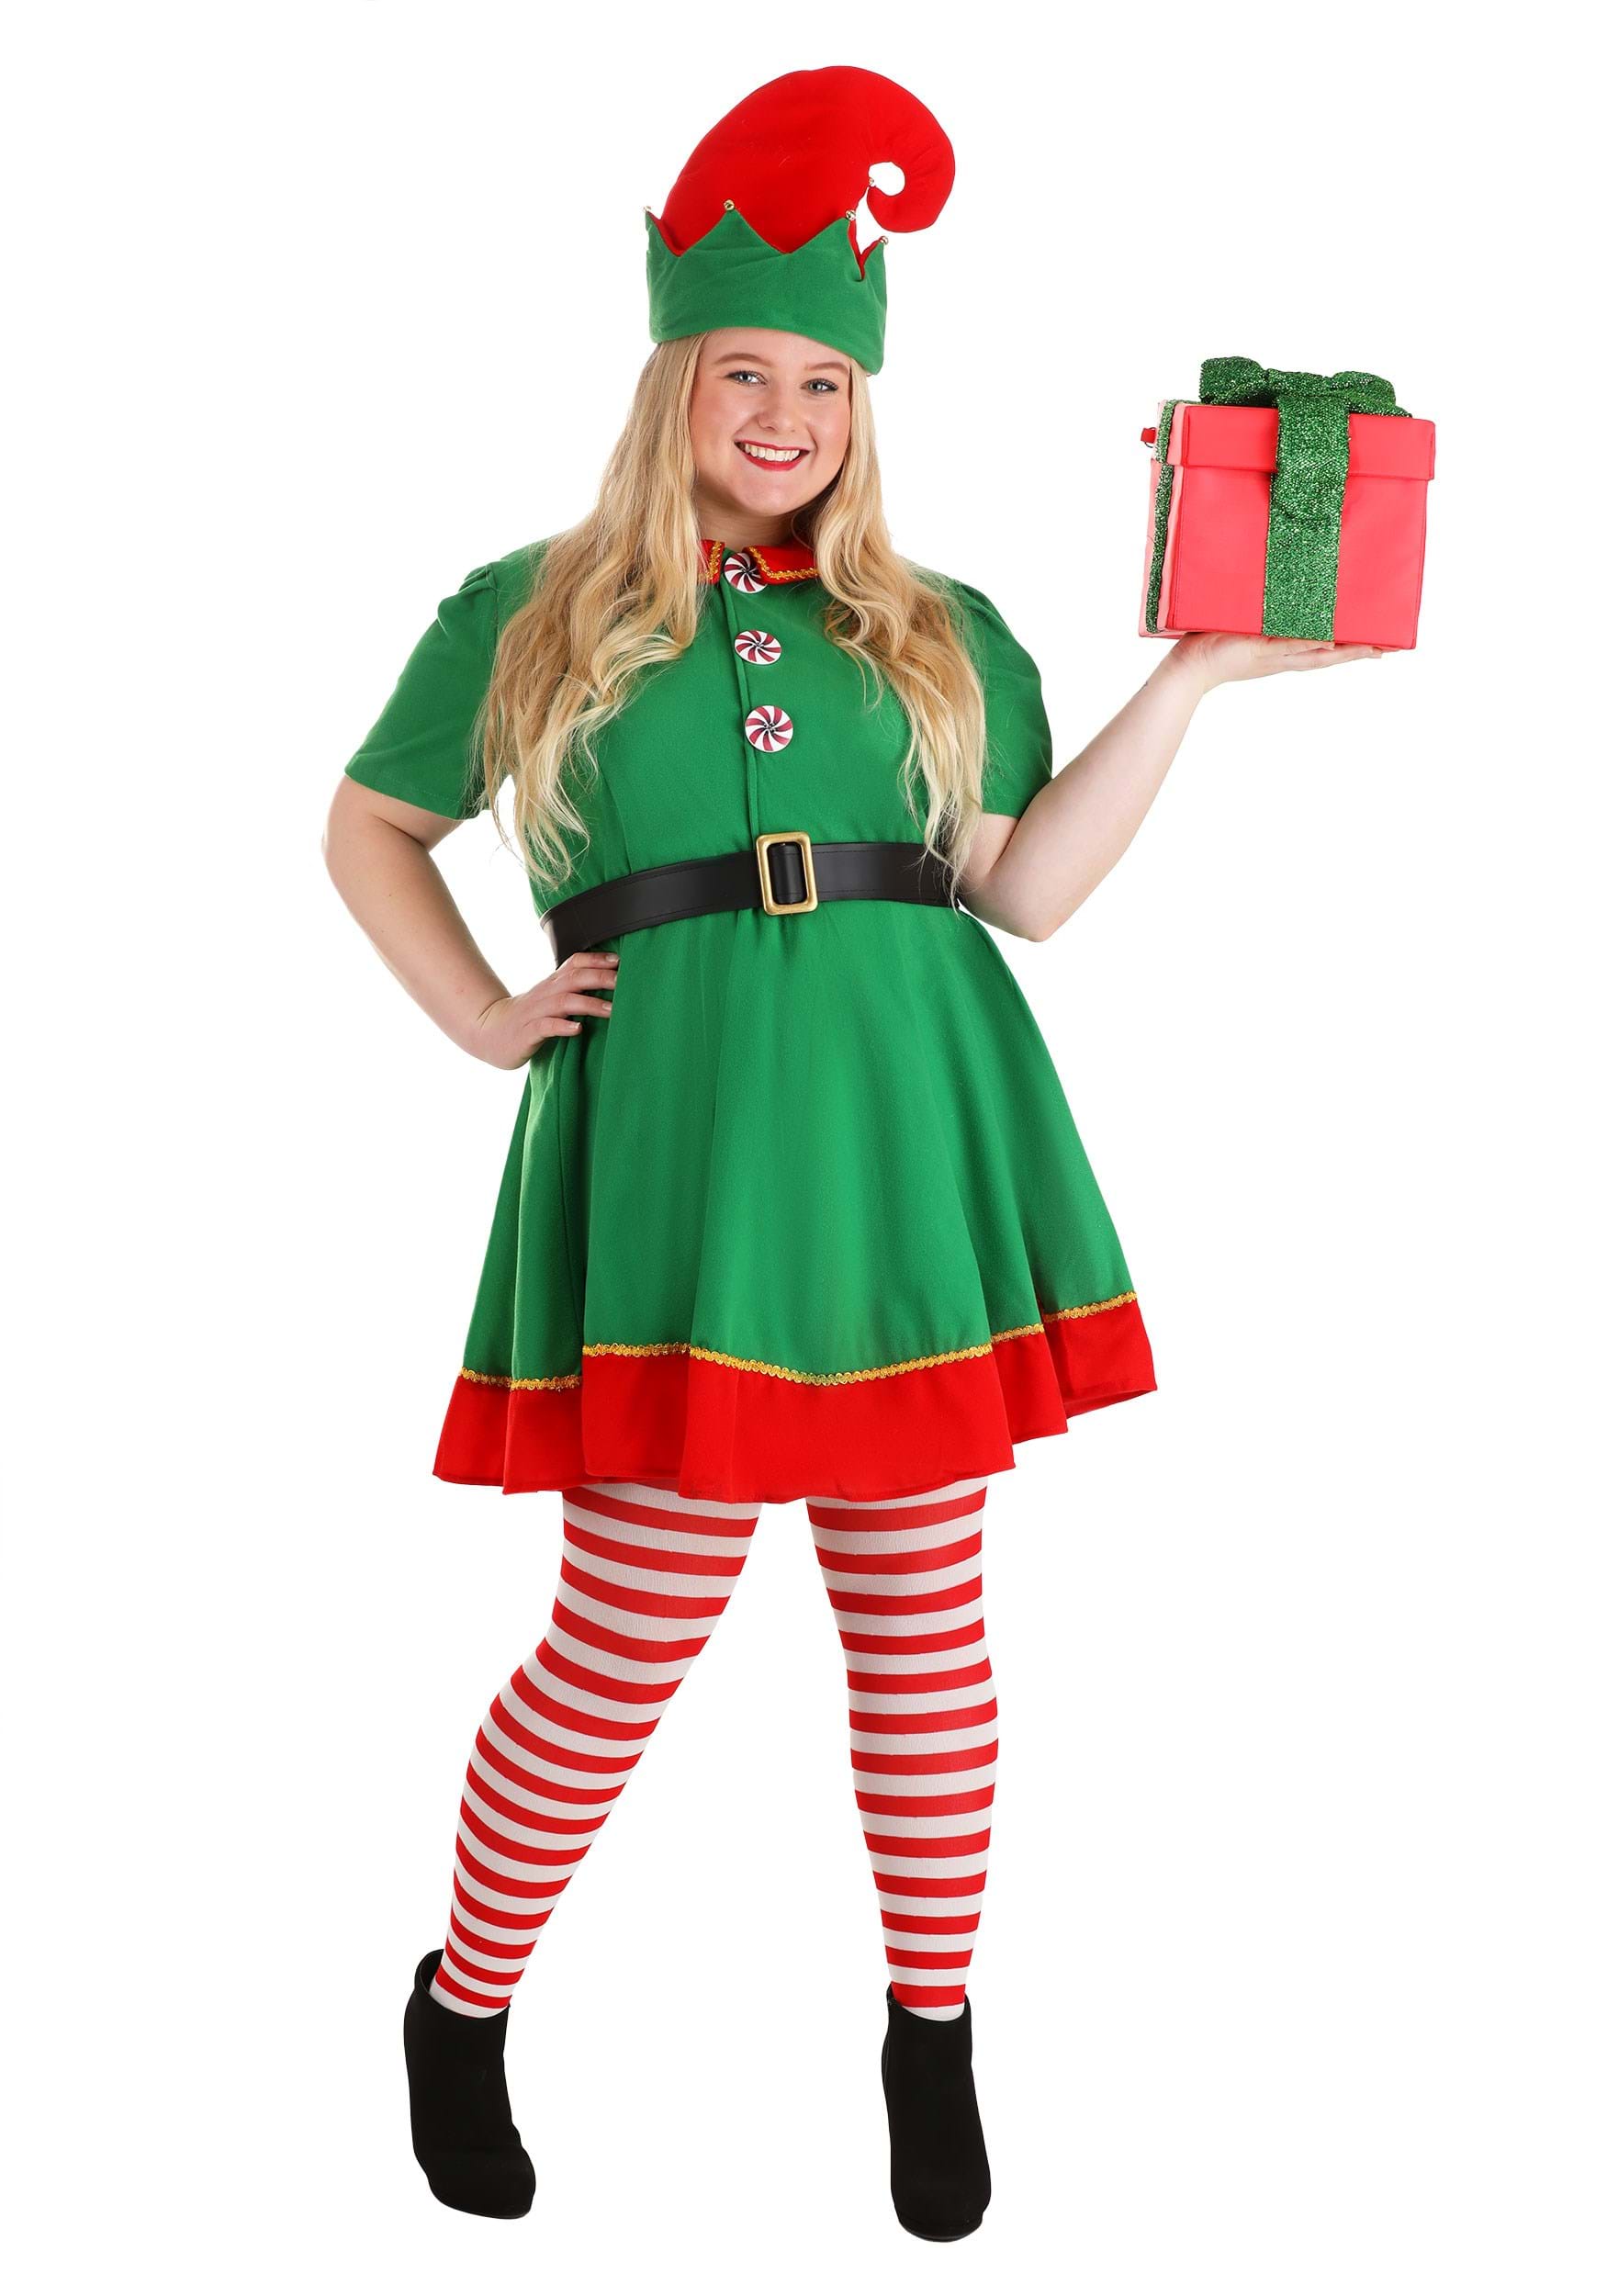 Photos - Fancy Dress FUN Costumes Plus Size Holiday Elf Costume for Women Green/Red FUN2177